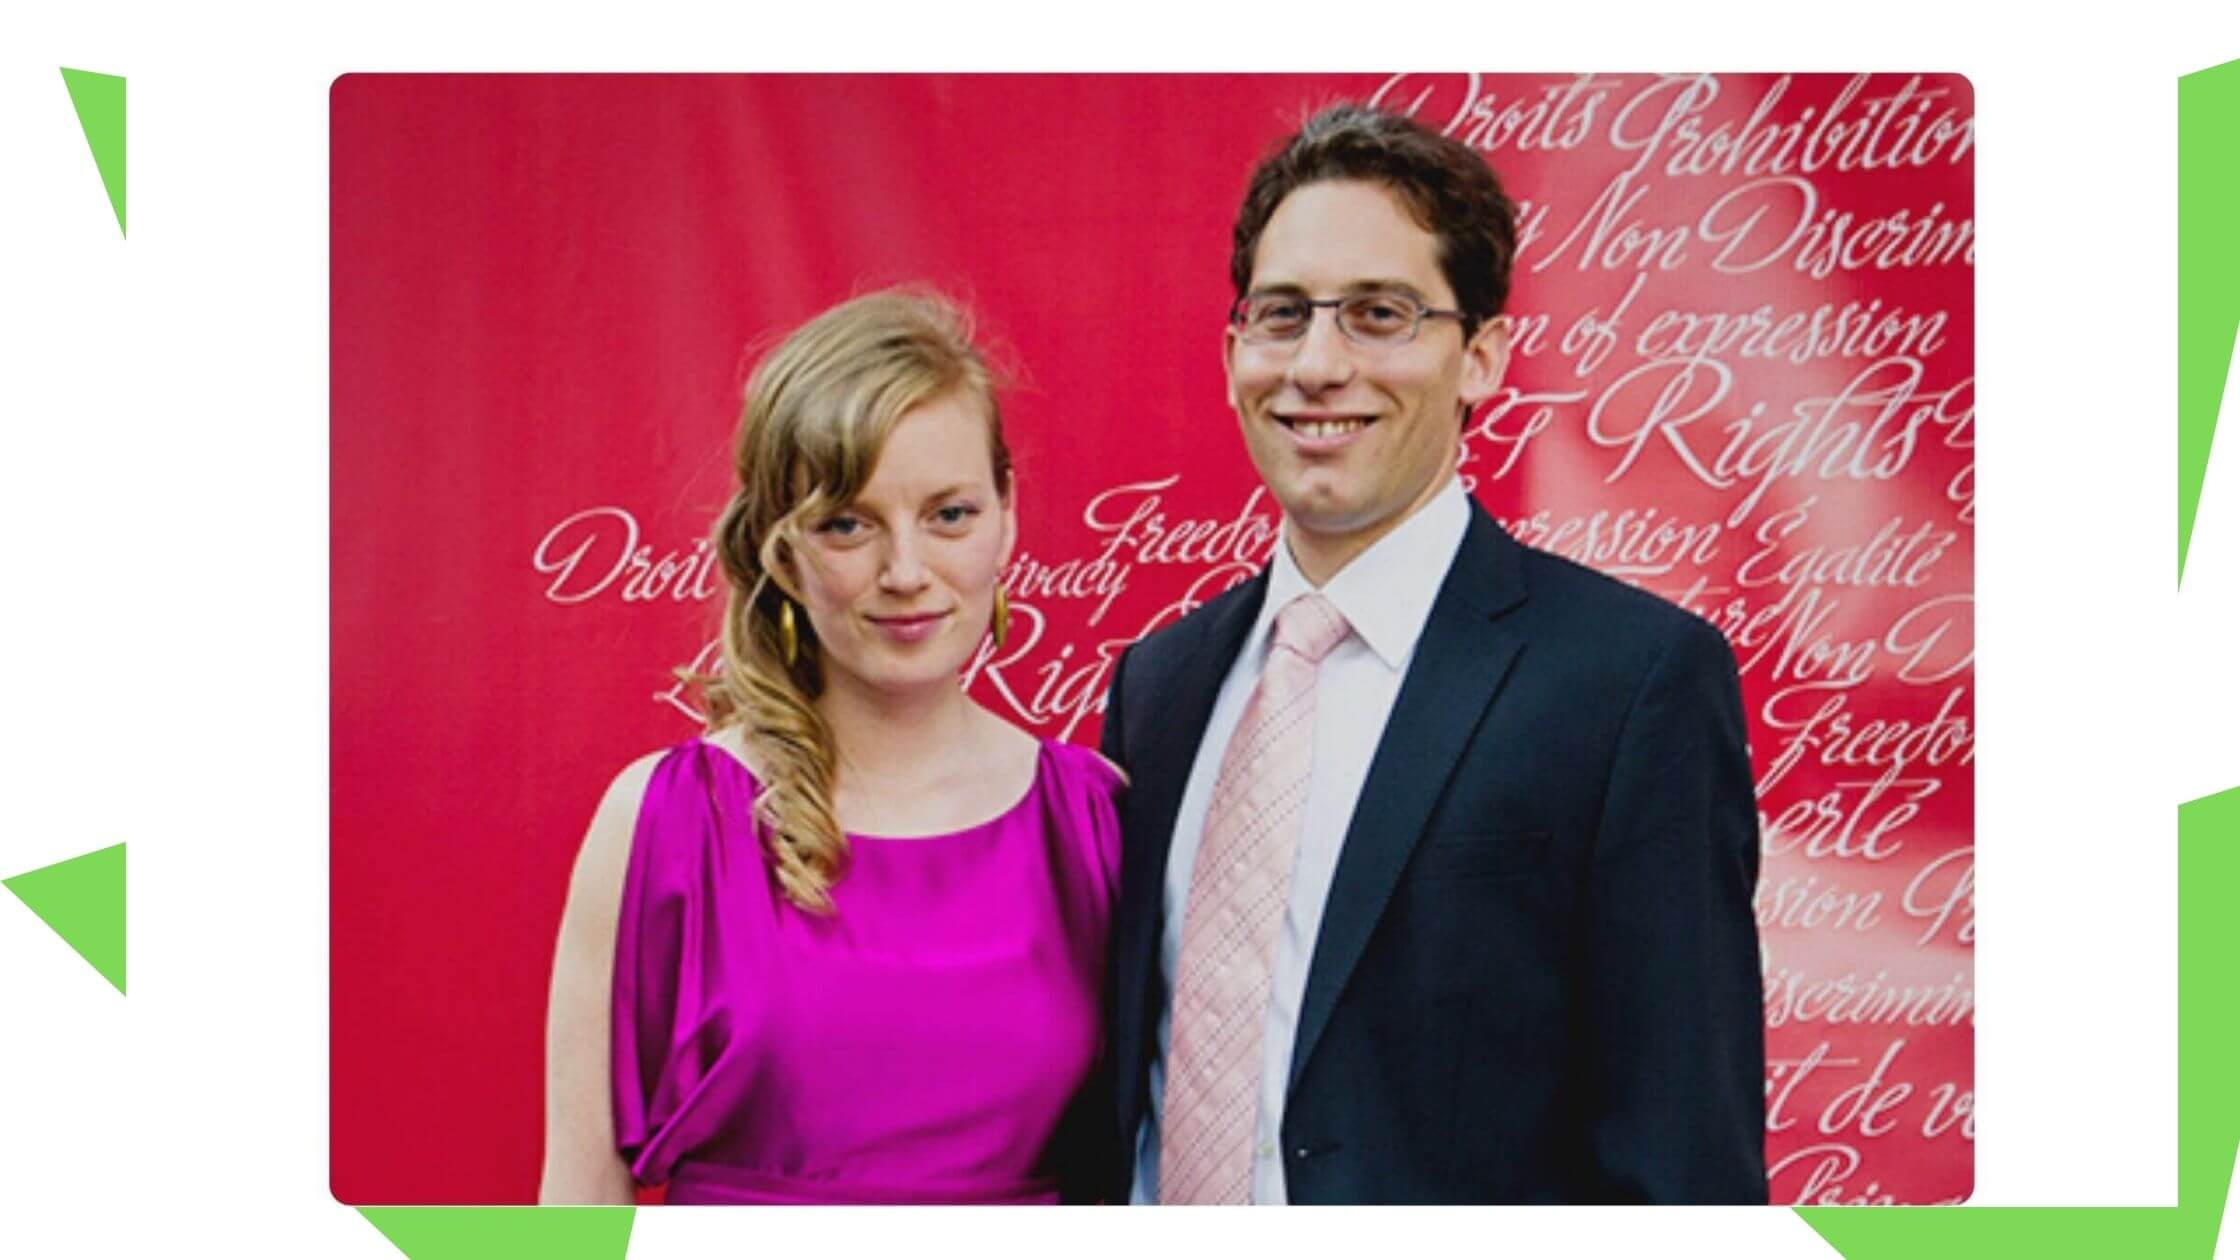 The Promising 13 Years Of Sarah Polley With David Sandomierski, Sarah Polley Won The Heart Of David Sandomierski: All About The Brilliant Actress, Director, Writer Sarah Polley Bio, Personal Life, Career, Relationship Timeline